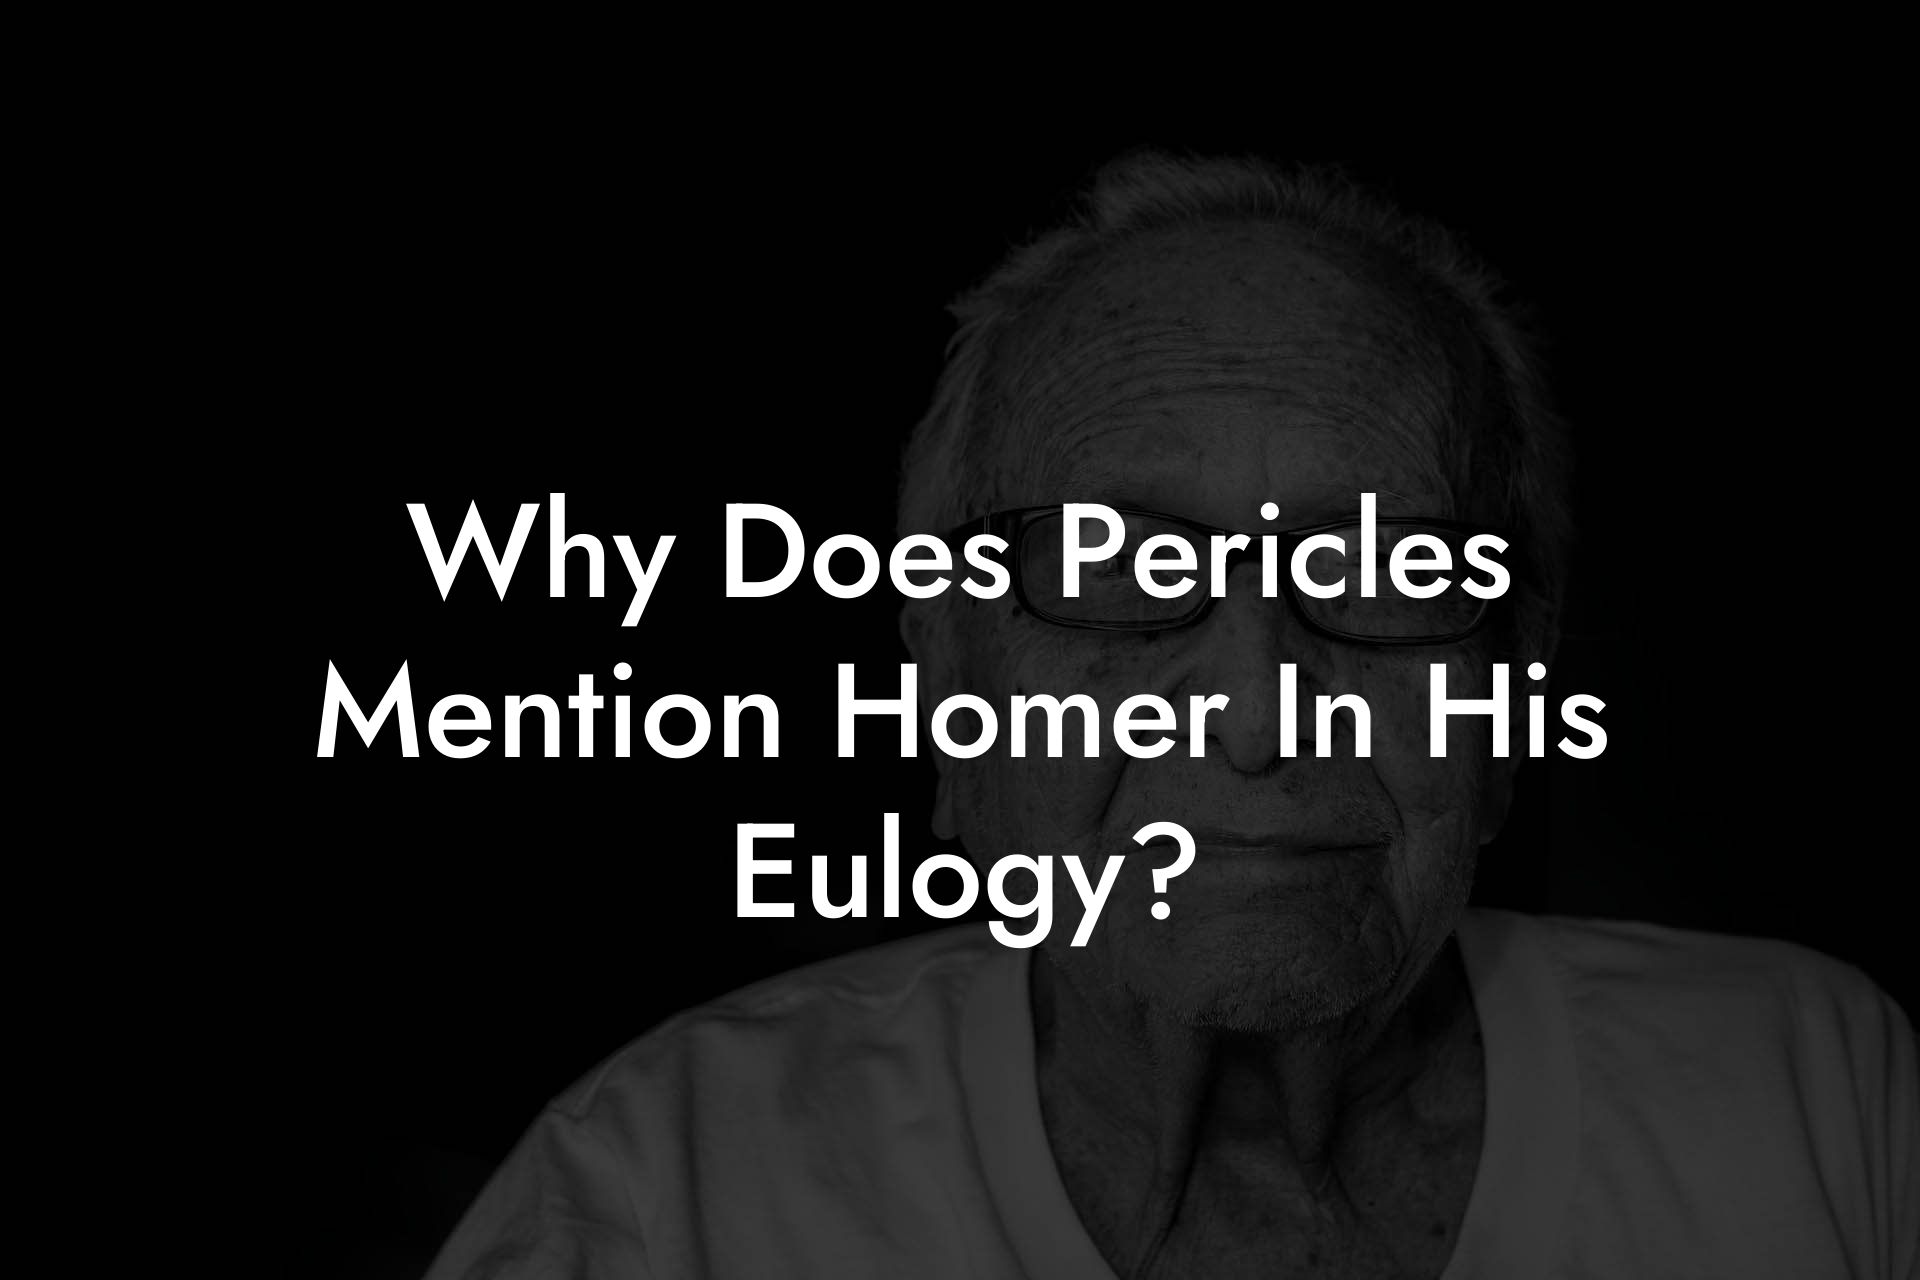 Why Does Pericles Mention Homer In His Eulogy?